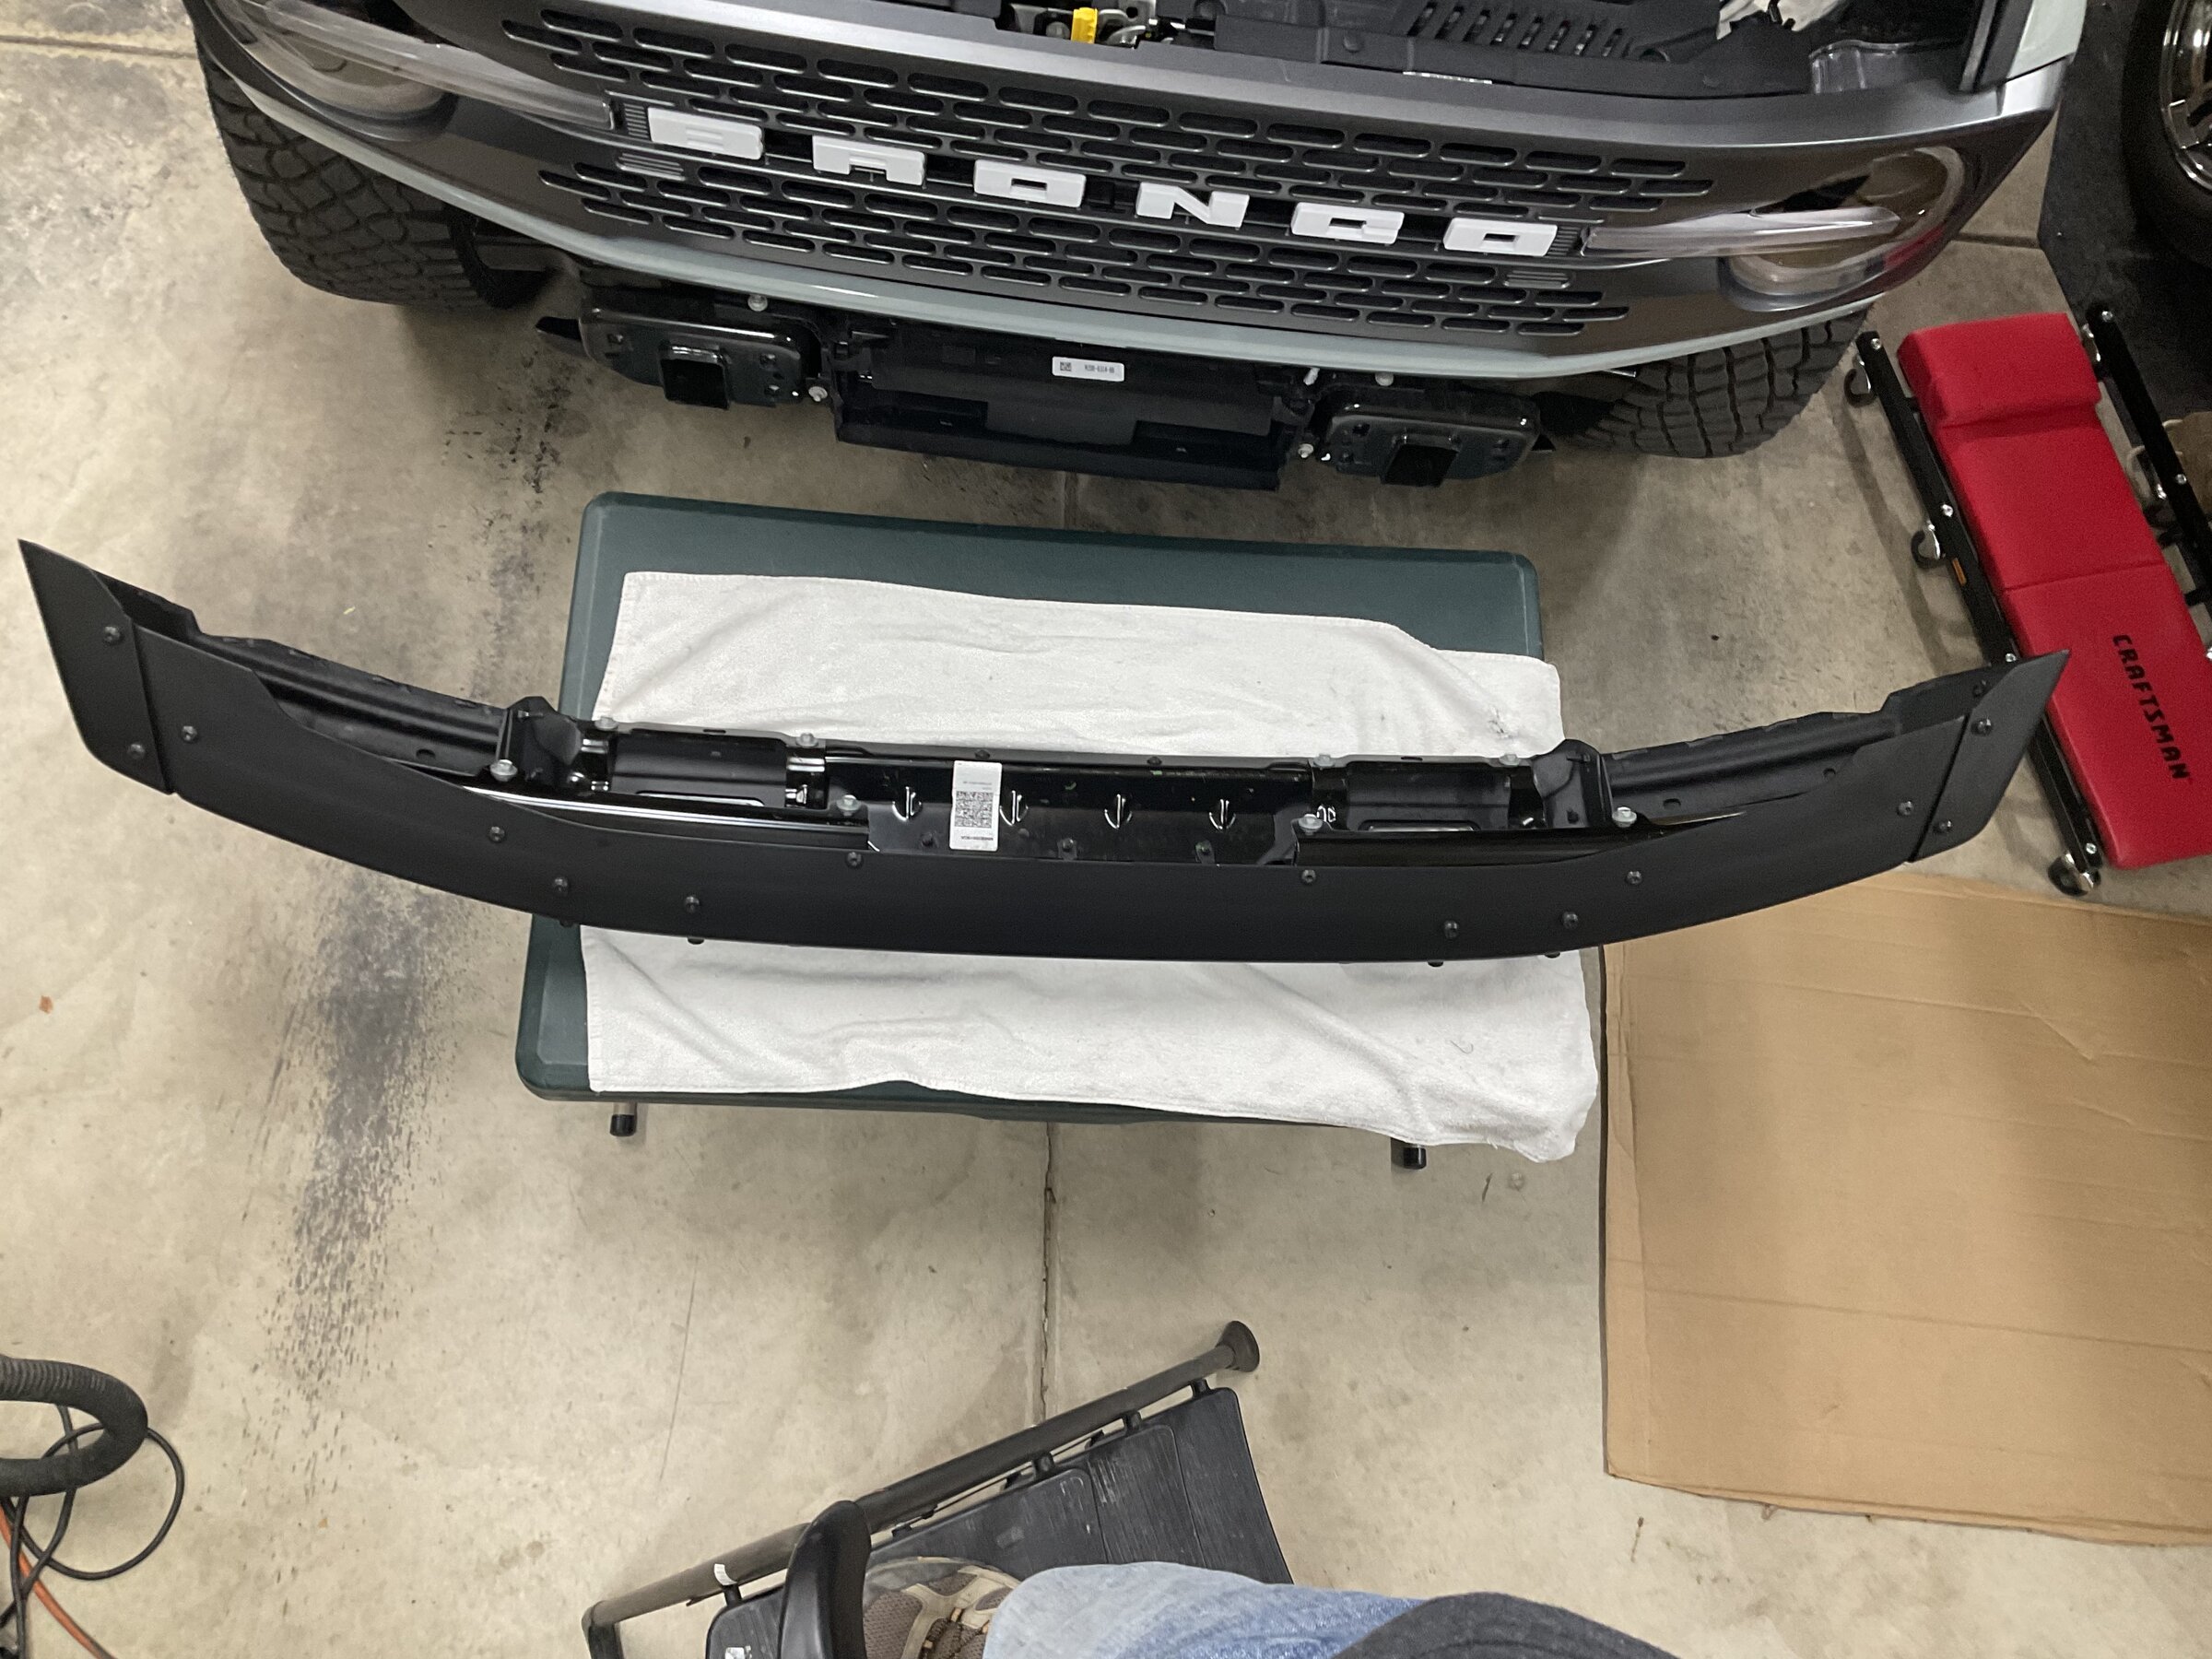 Ford Bronco Bronco Modular Bumper and OEM Bash Plates - Removed day 2 @ 30 miles! 50011873-A31E-4ECE-87AA-45A110940B73